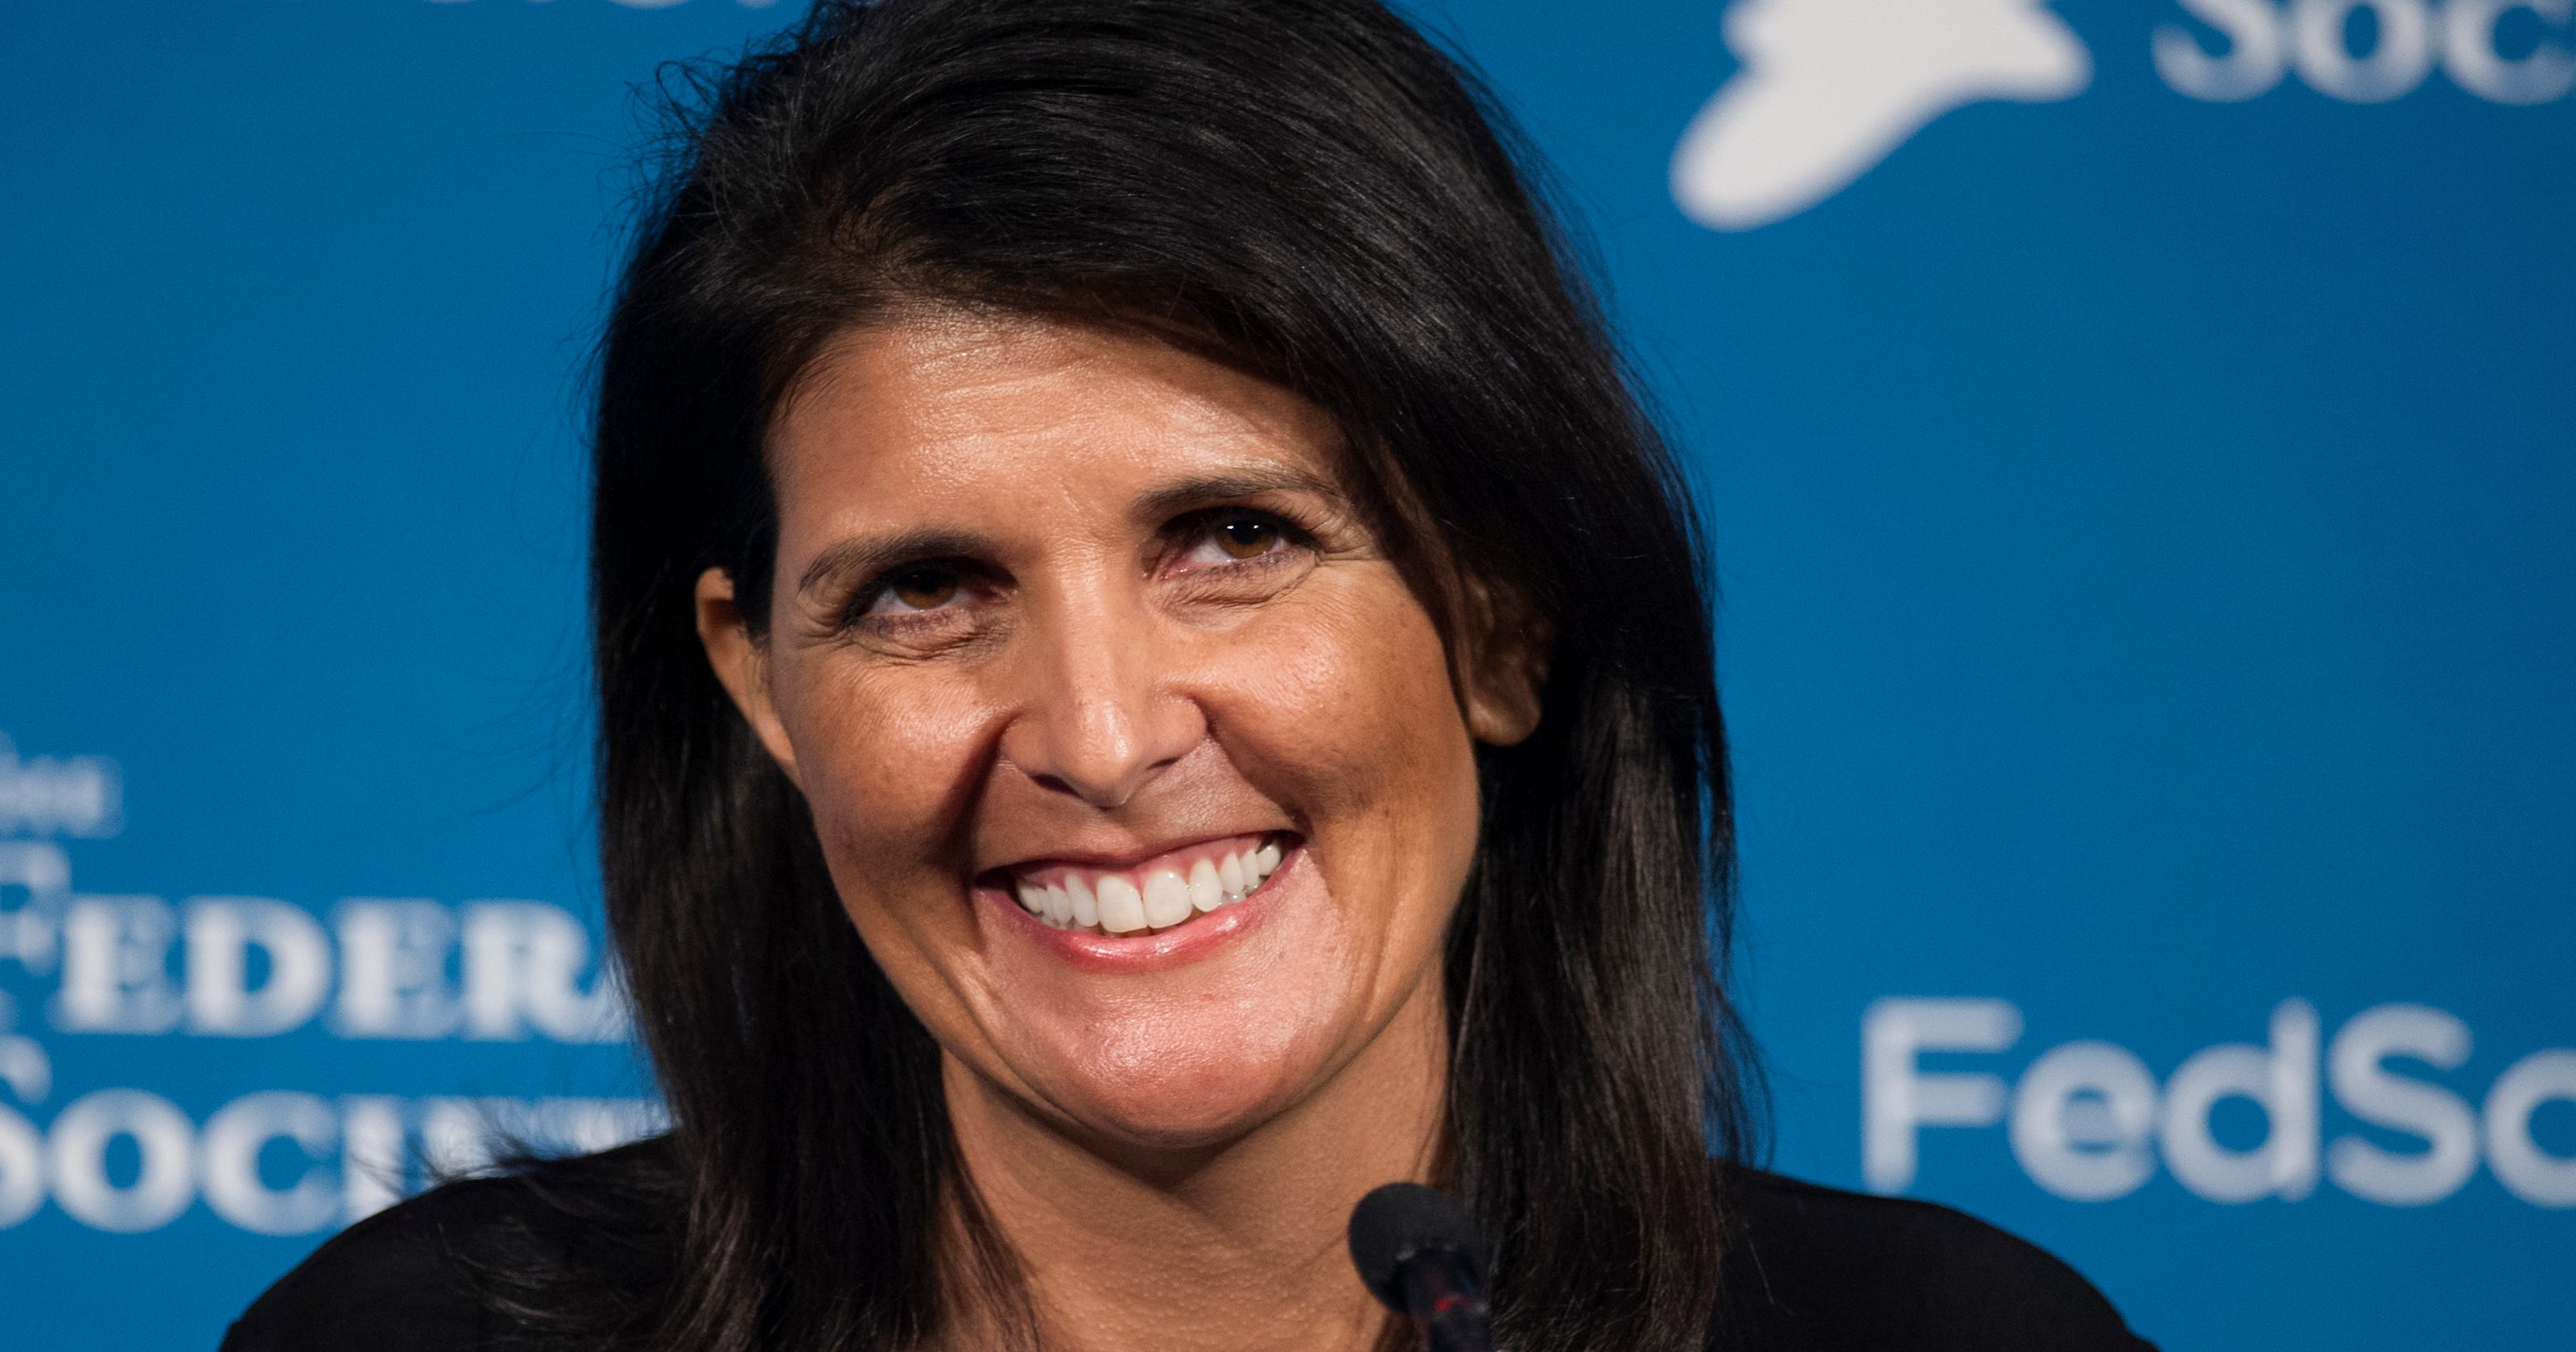 5 things to know about Trump's U.N. pick S.C. Gov. Nikki Haley